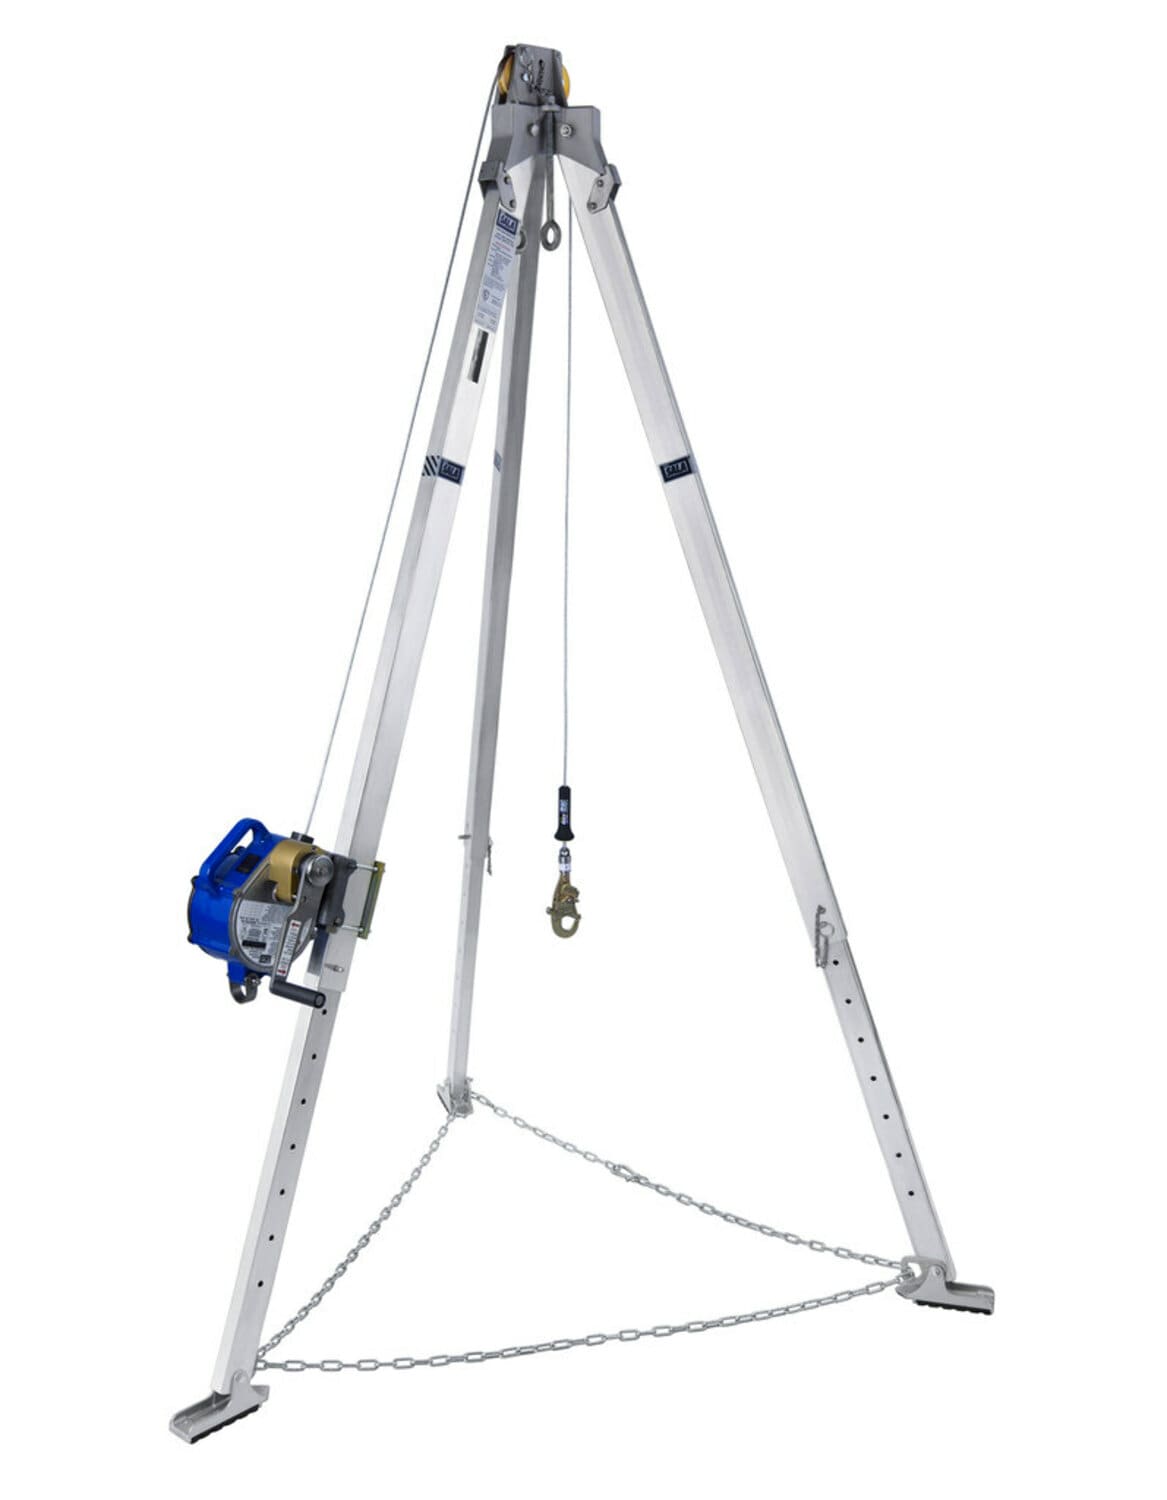 7012820471 - 3M DBI-SALA Confined Space Aluminum Tripod with 3-Way SRL 8301039, 9 ft High, 130 ft Stainless Steel Cable